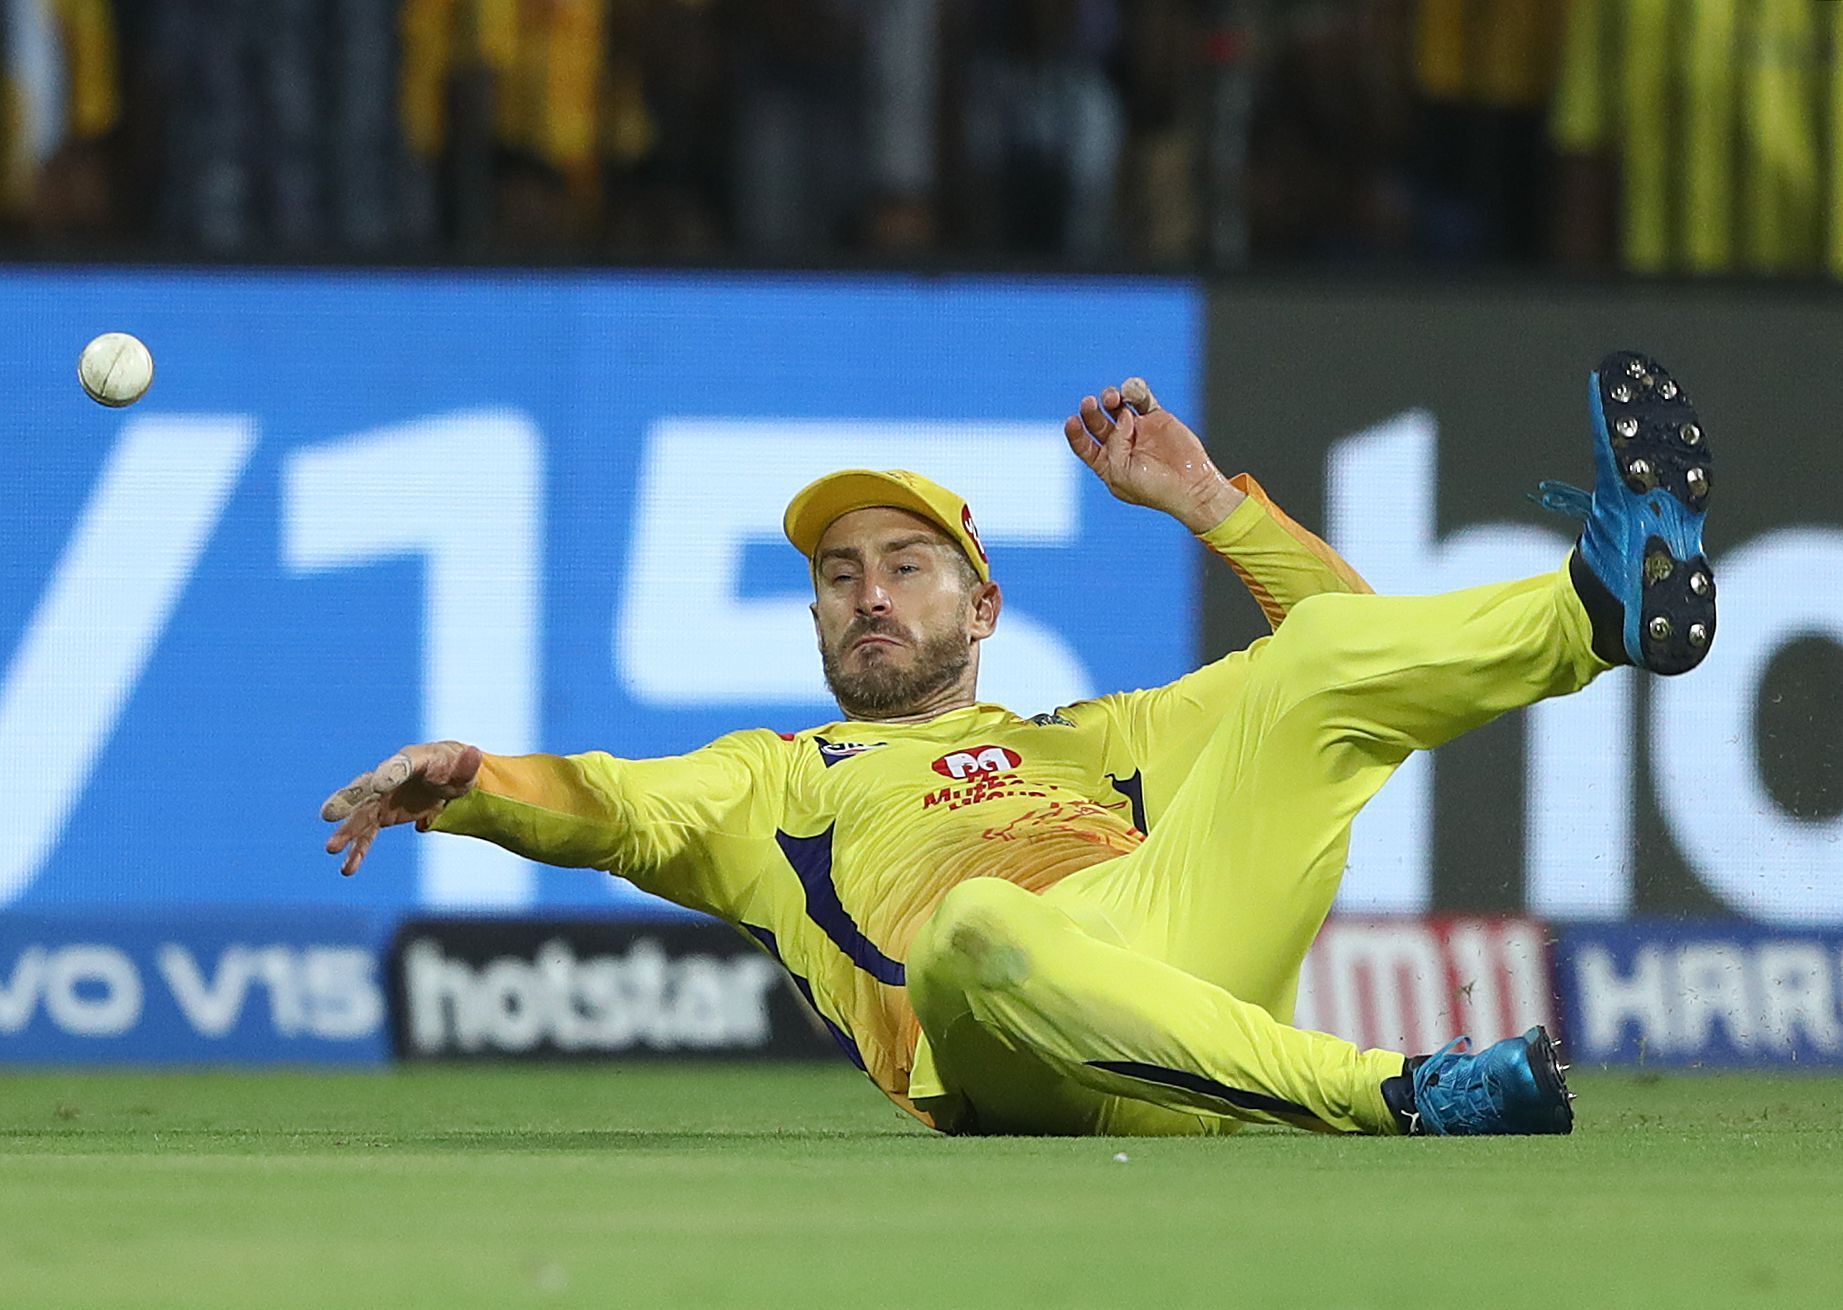 Faf du Plessis has performed exceptionally well in the IPL